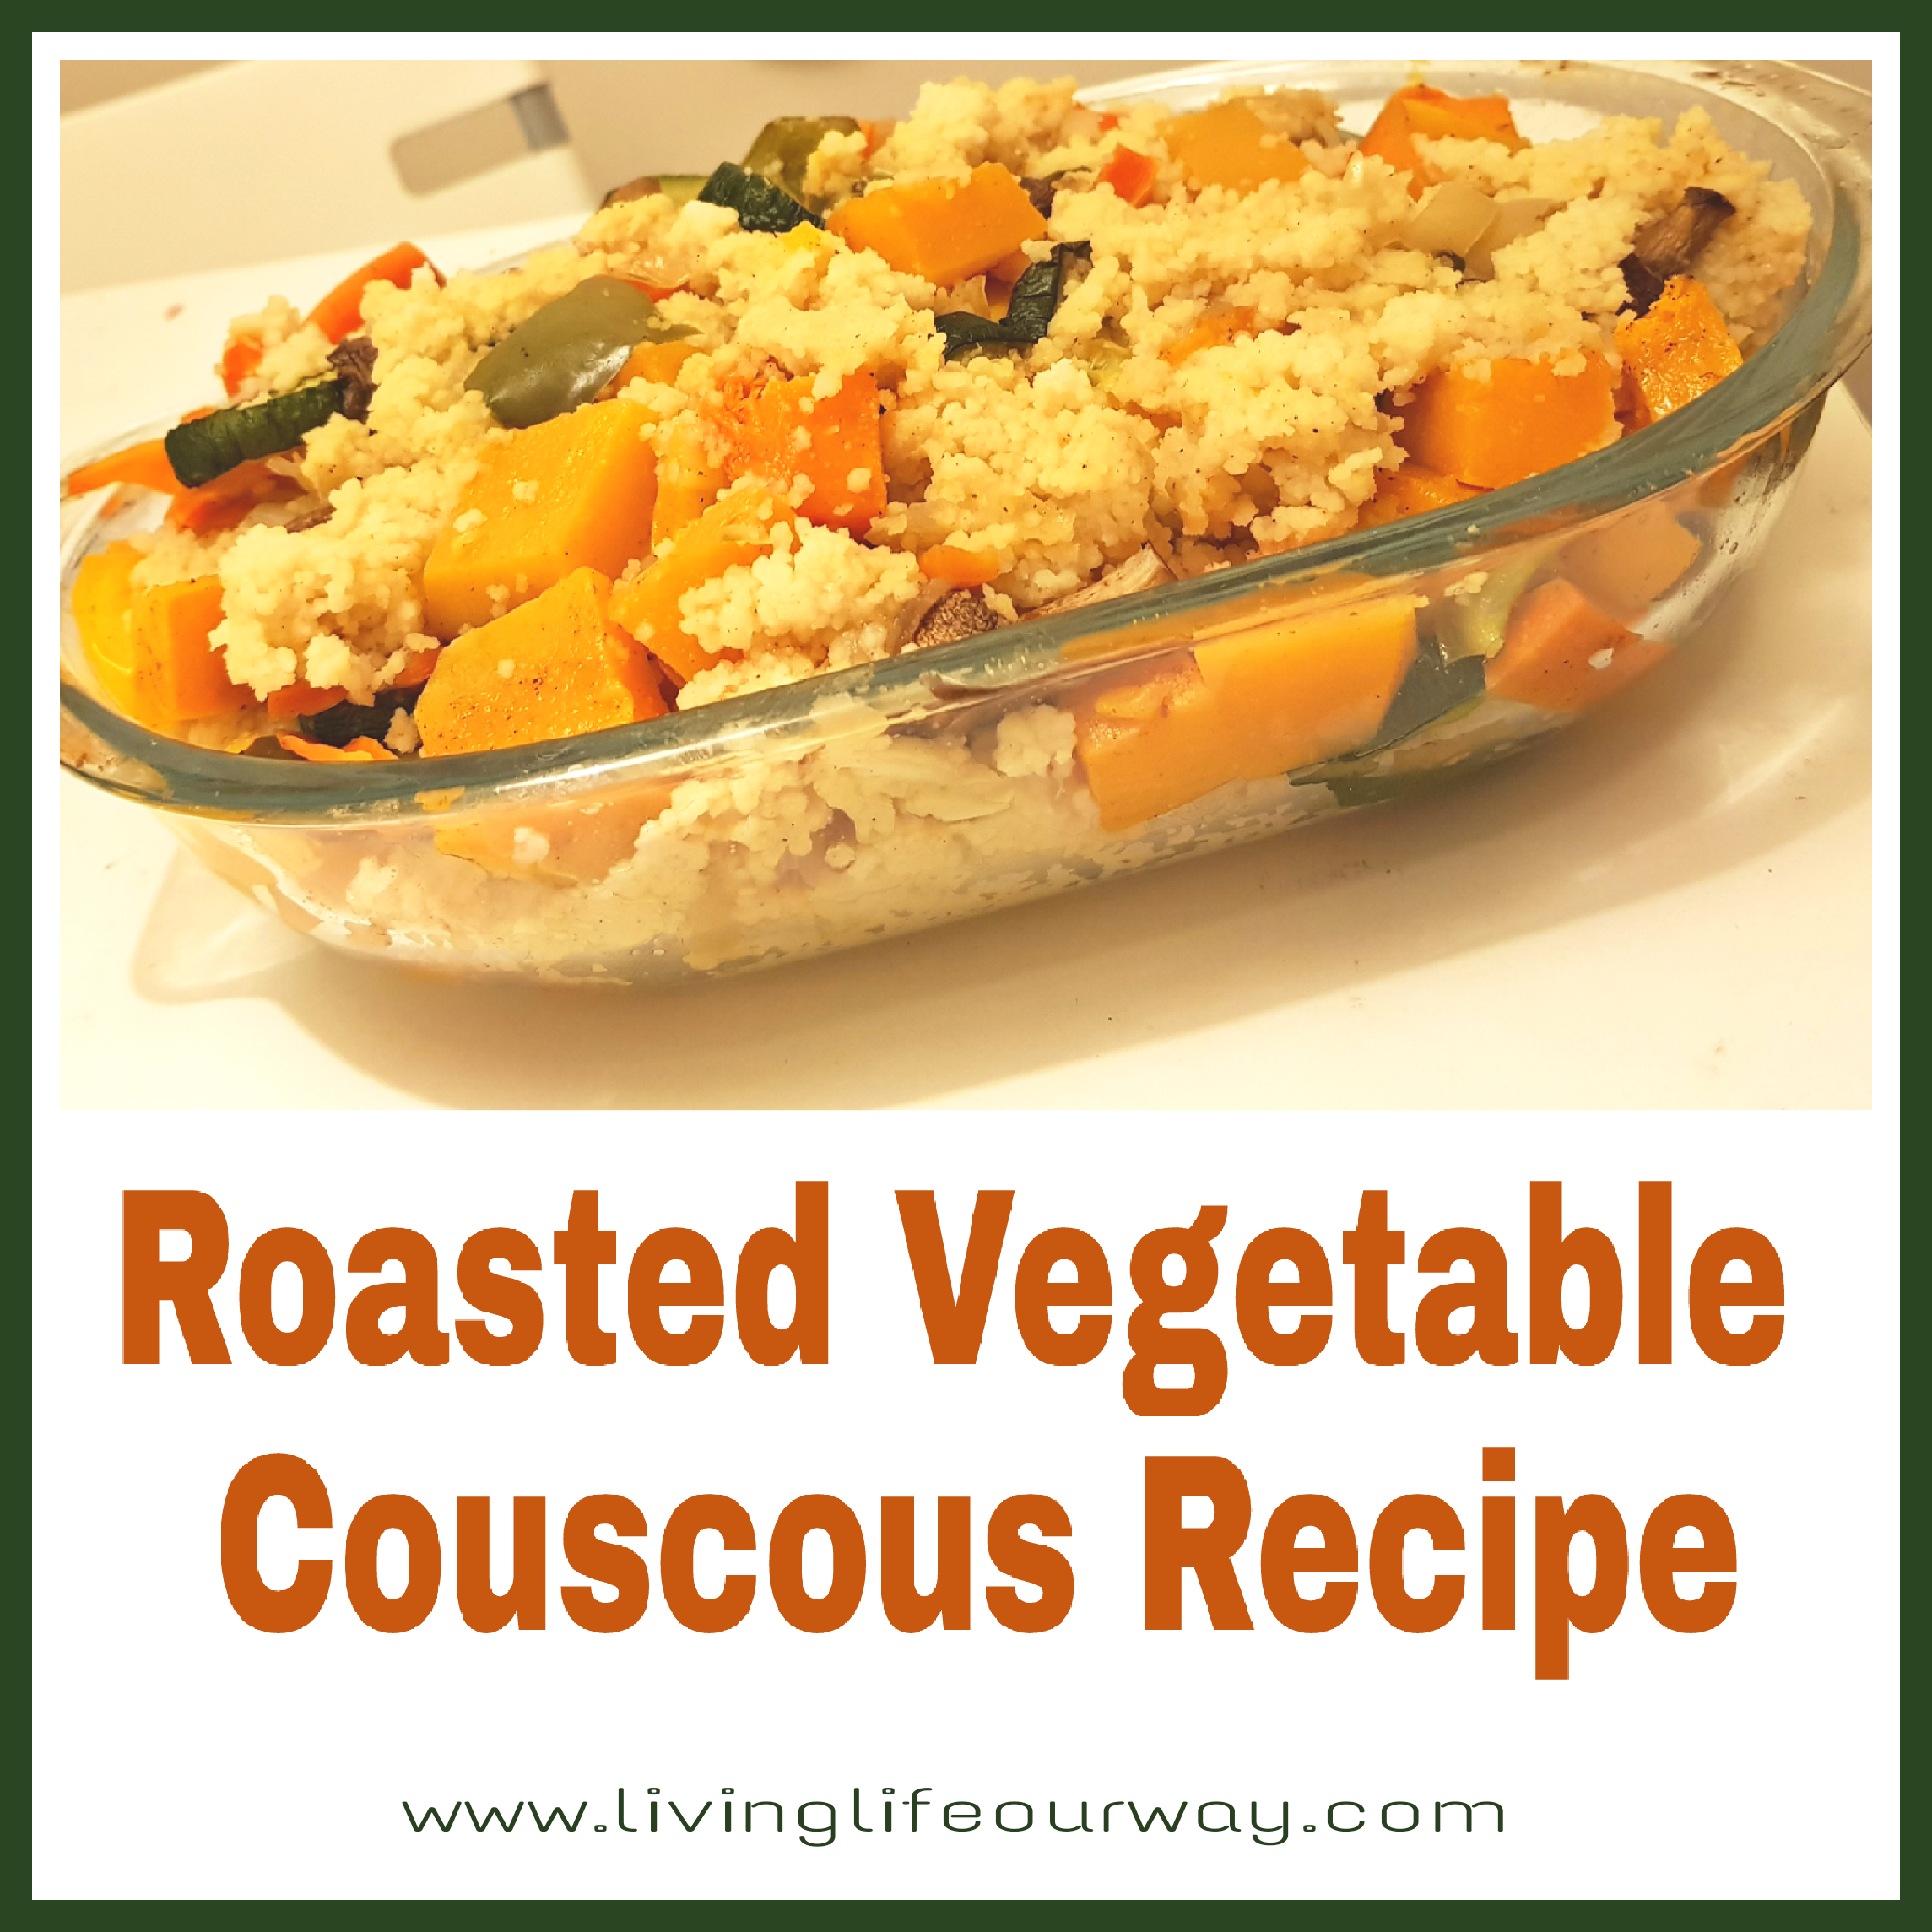 recipe, healthy, vegetarian, microwave, easy meals, clean eating, family dinner, stress-free mealtimes, life hacks, roasted vegetable couscous